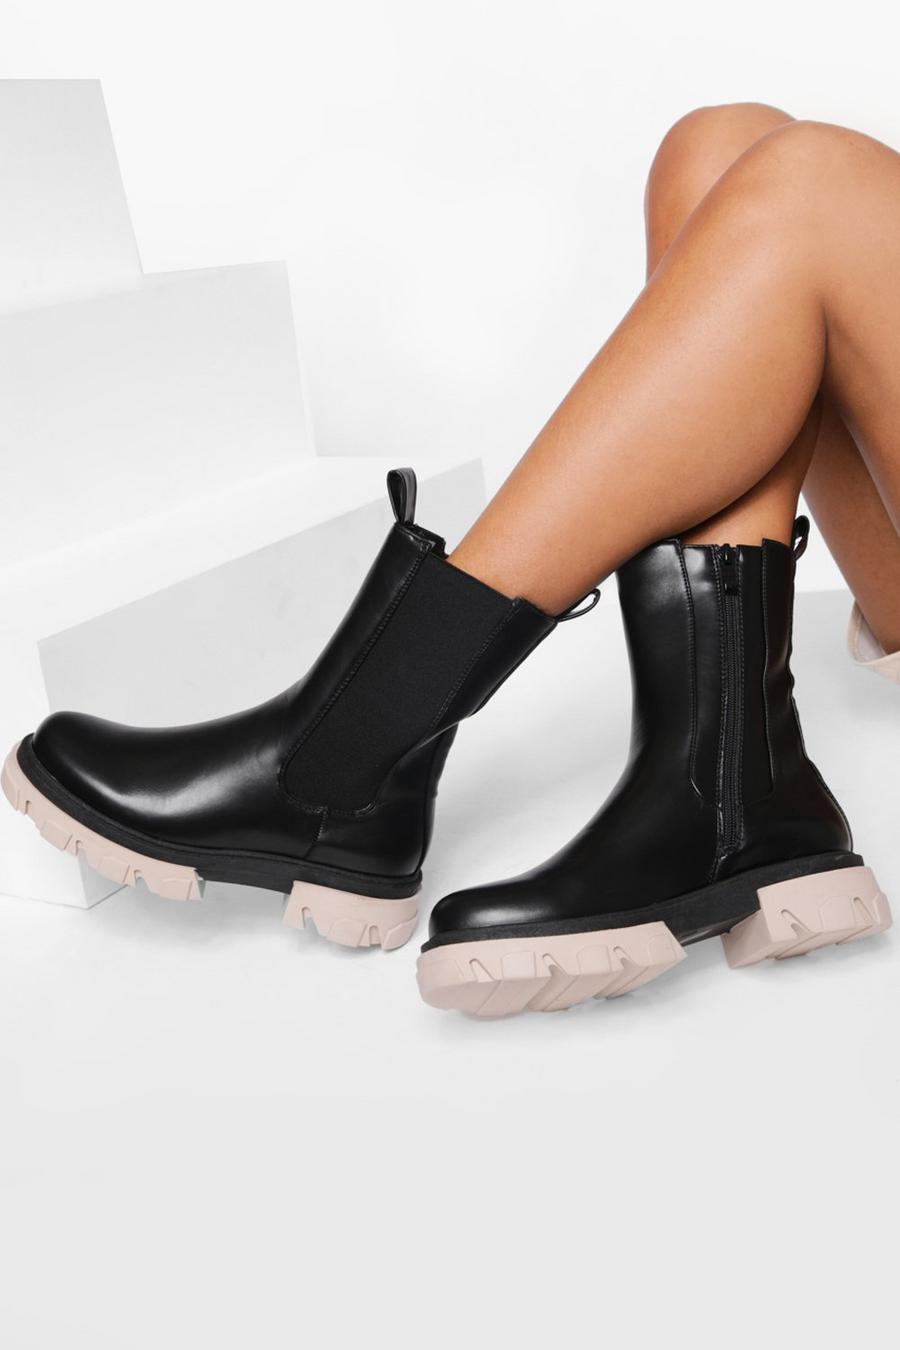 Black Calf Height Contrast Sole Chelsea Boots image number 1